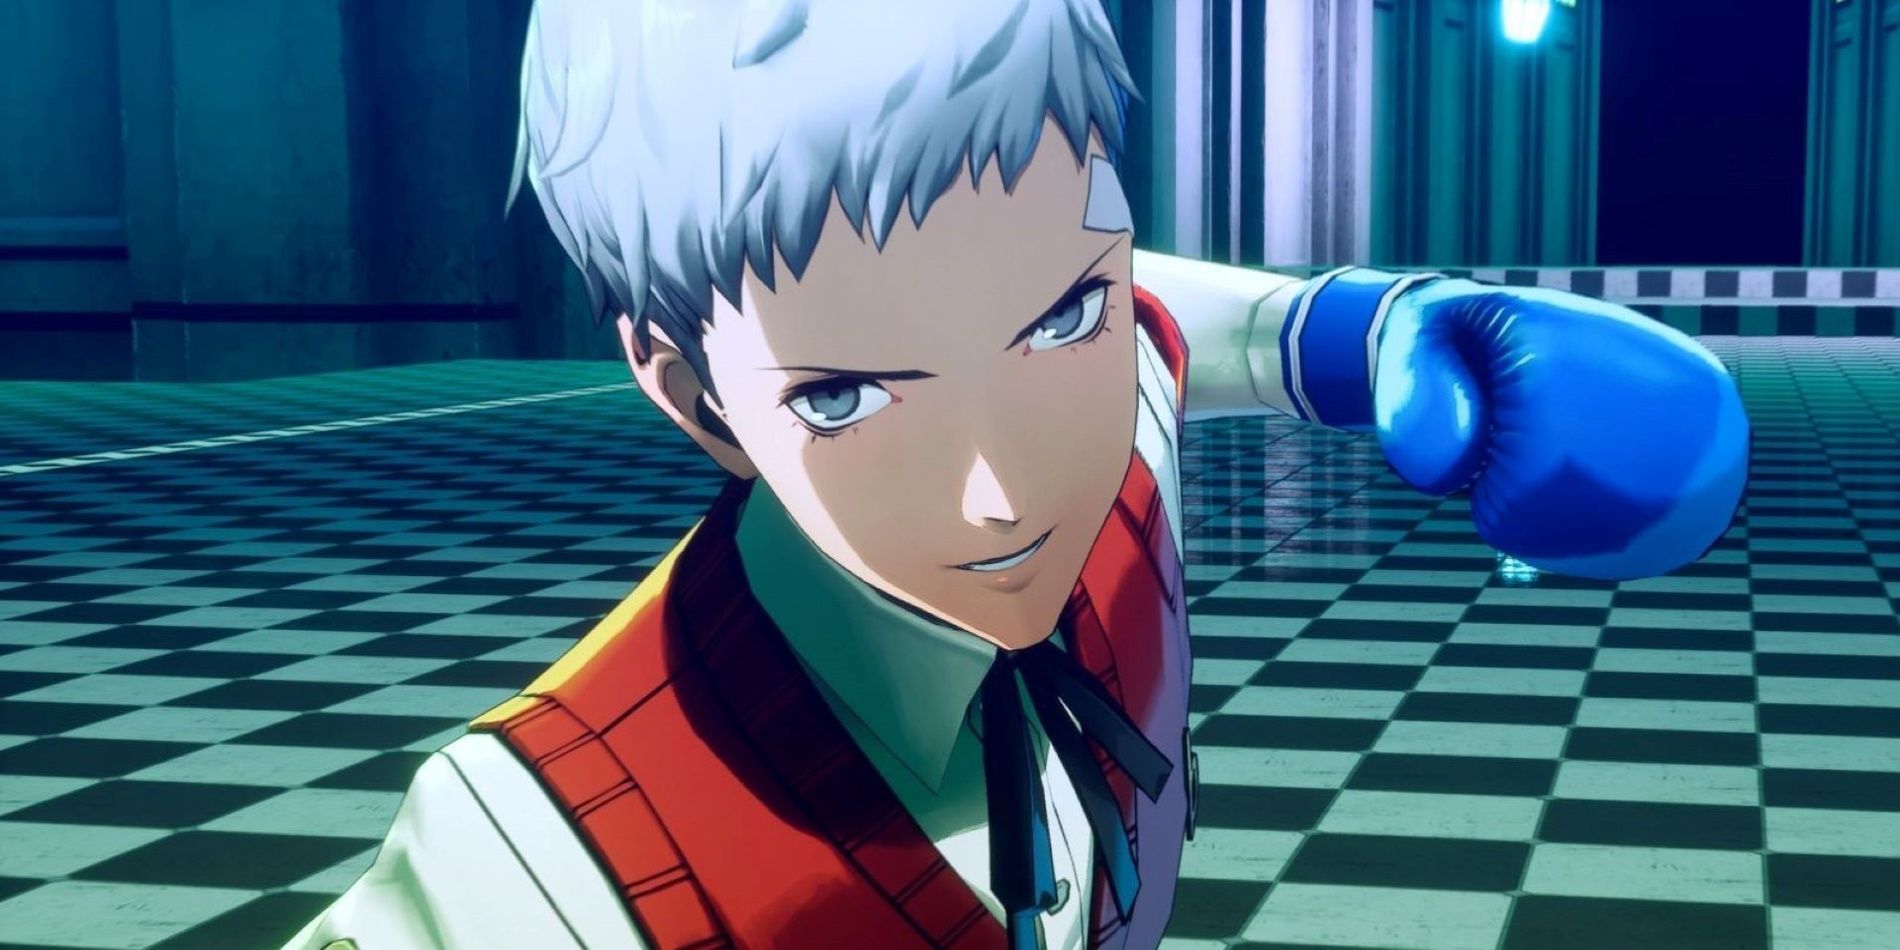 Persona 3 Reload's Akihiko preparing to punch with a blue boxing glove